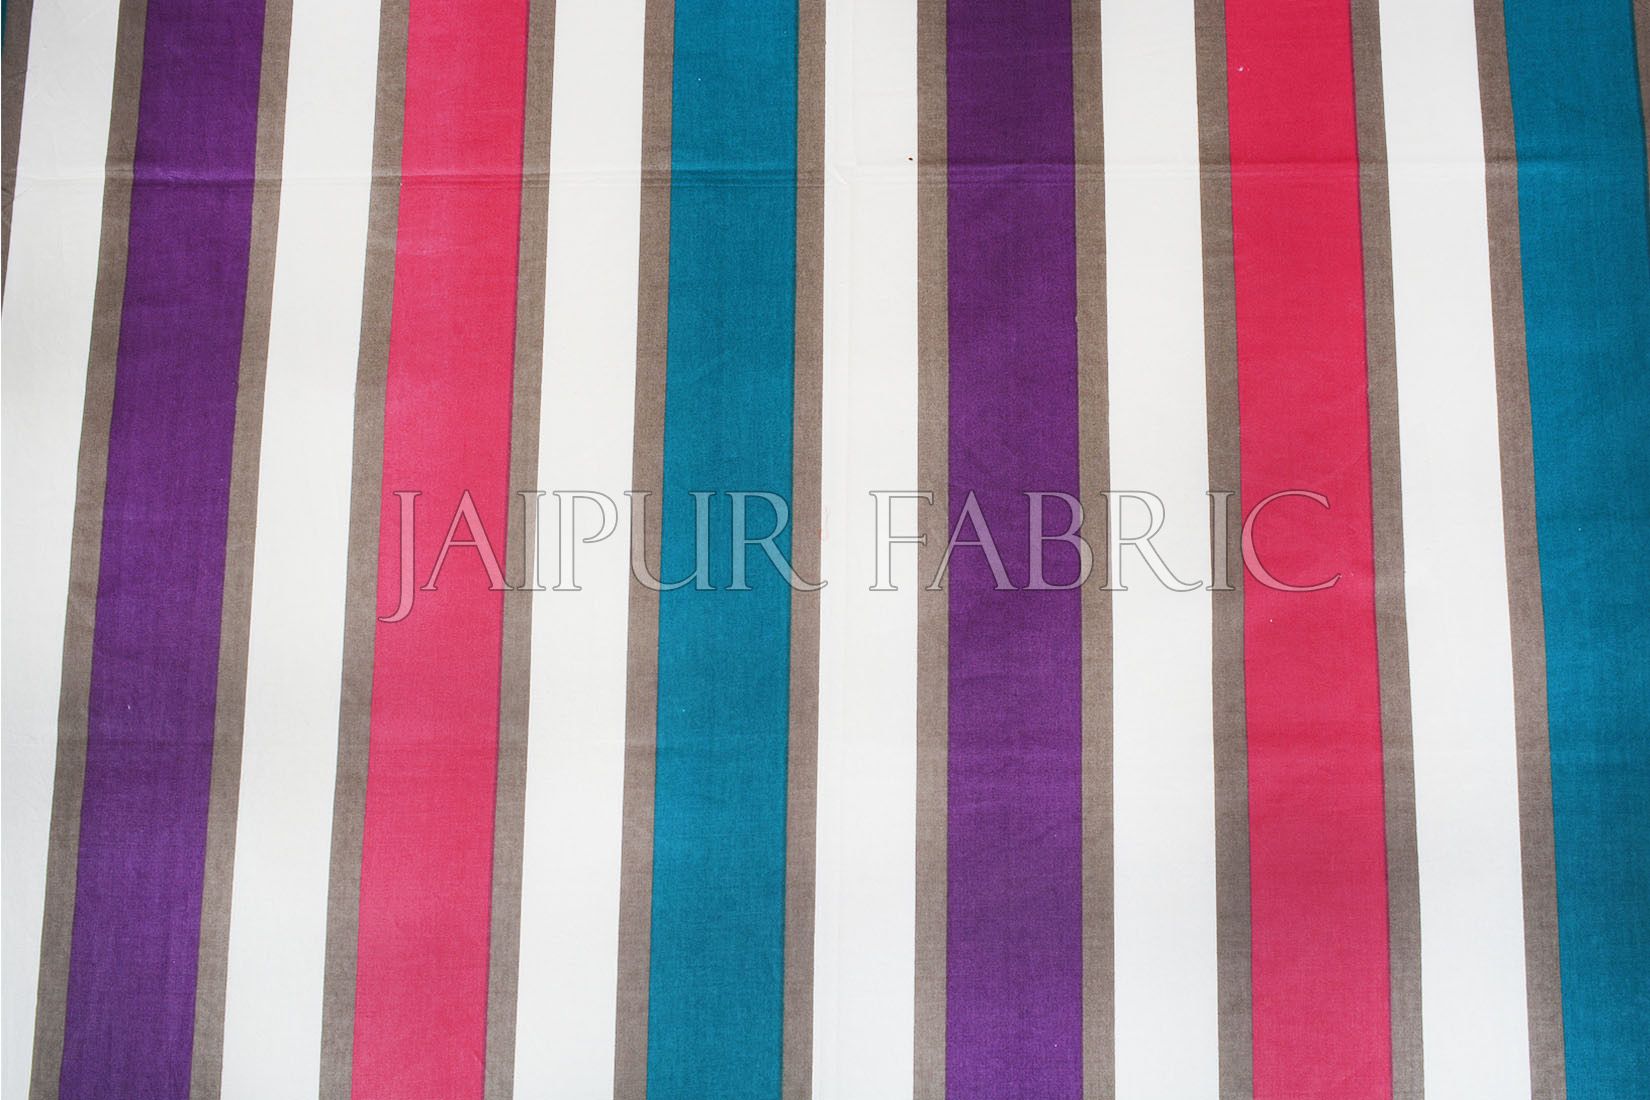 Pink and Purple Vertical Striped Cotton Double Bed Sheet